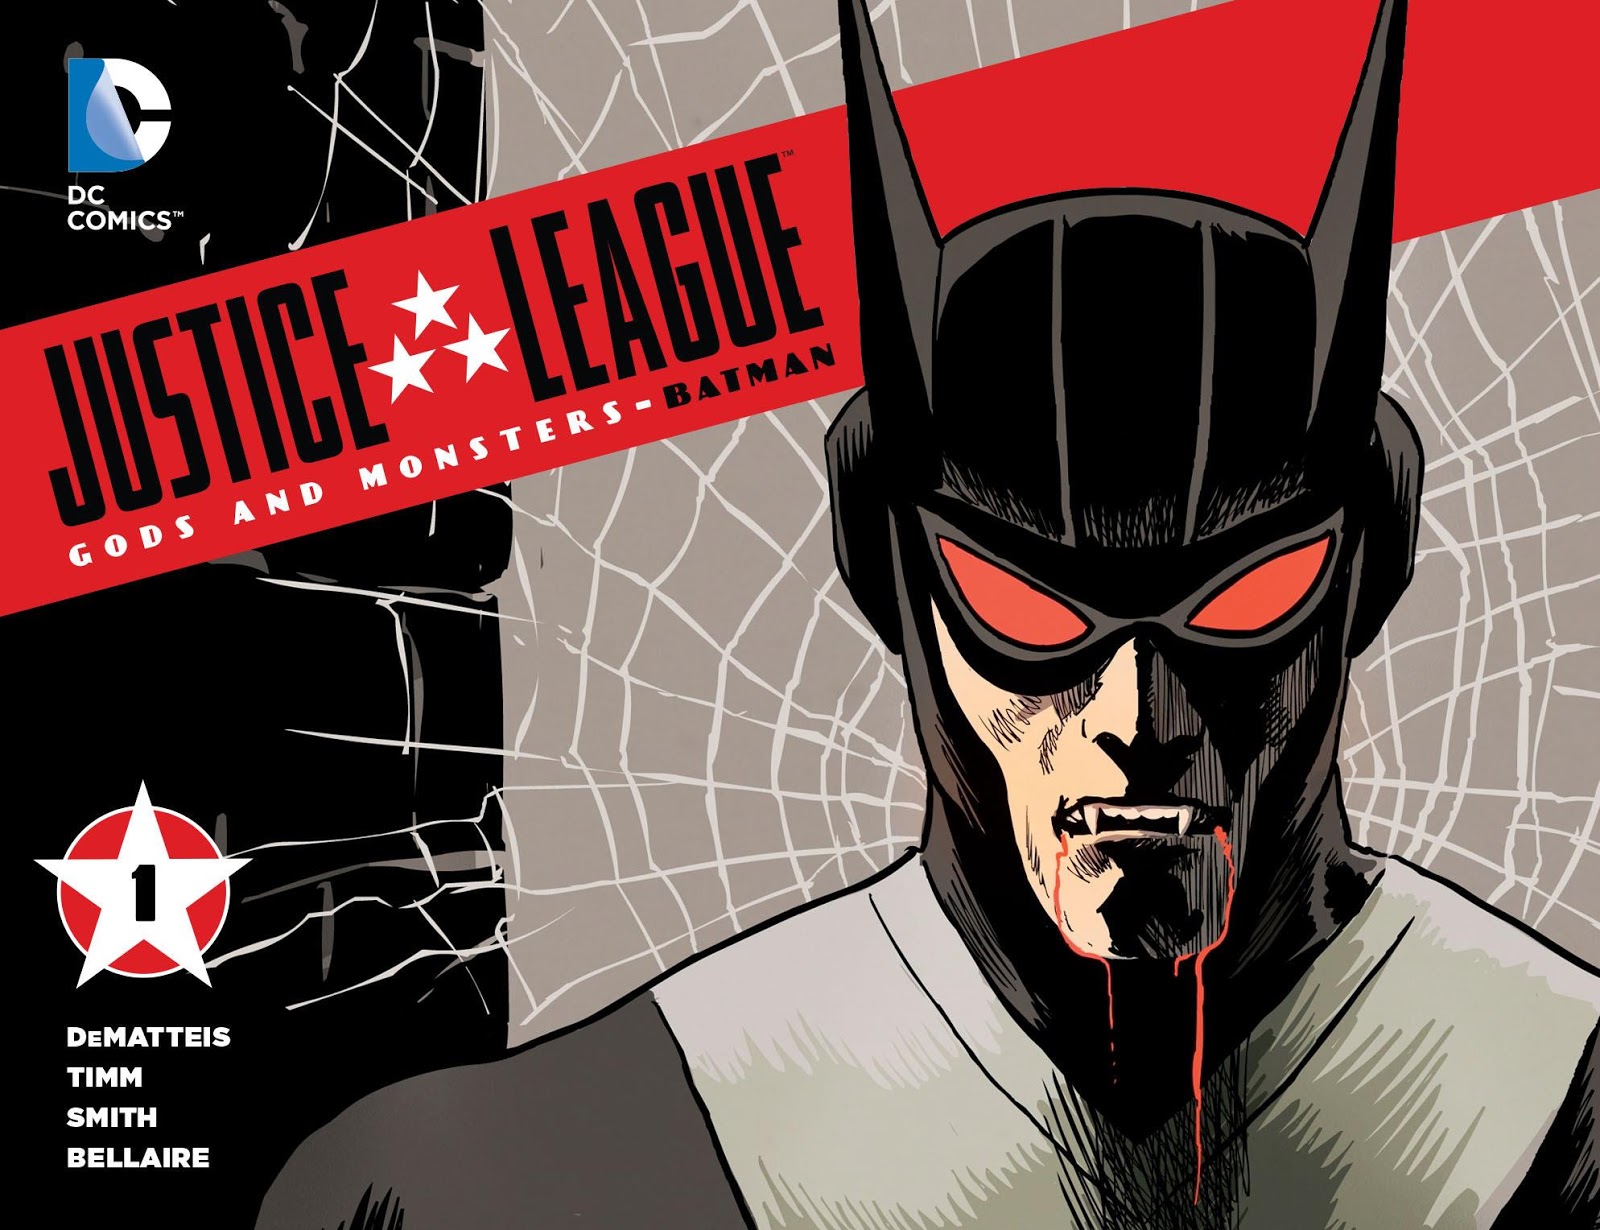 Weird Science DC Comics: Justice League: Gods and Monsters - Batman #1  (2015) Review